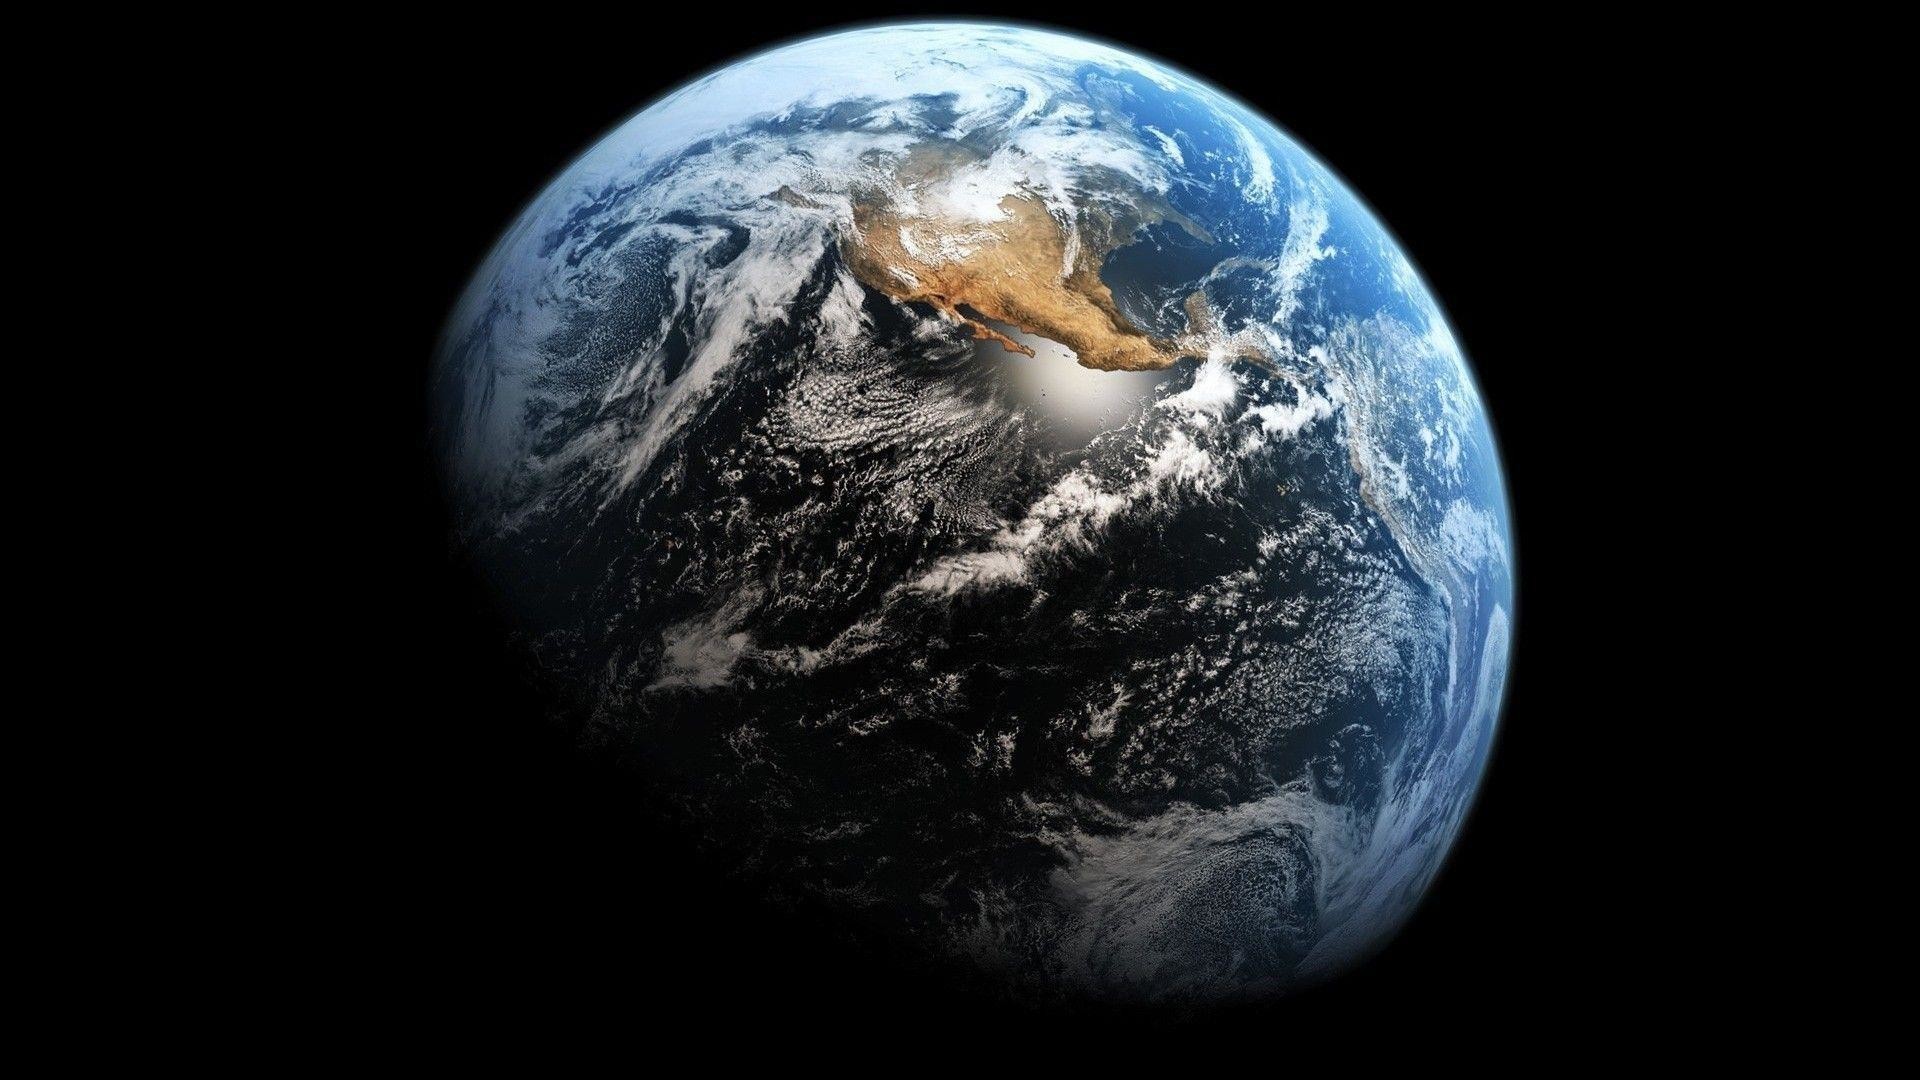 1920x1080 Earth desktop wallpaper - One of the Planets in our Solar System